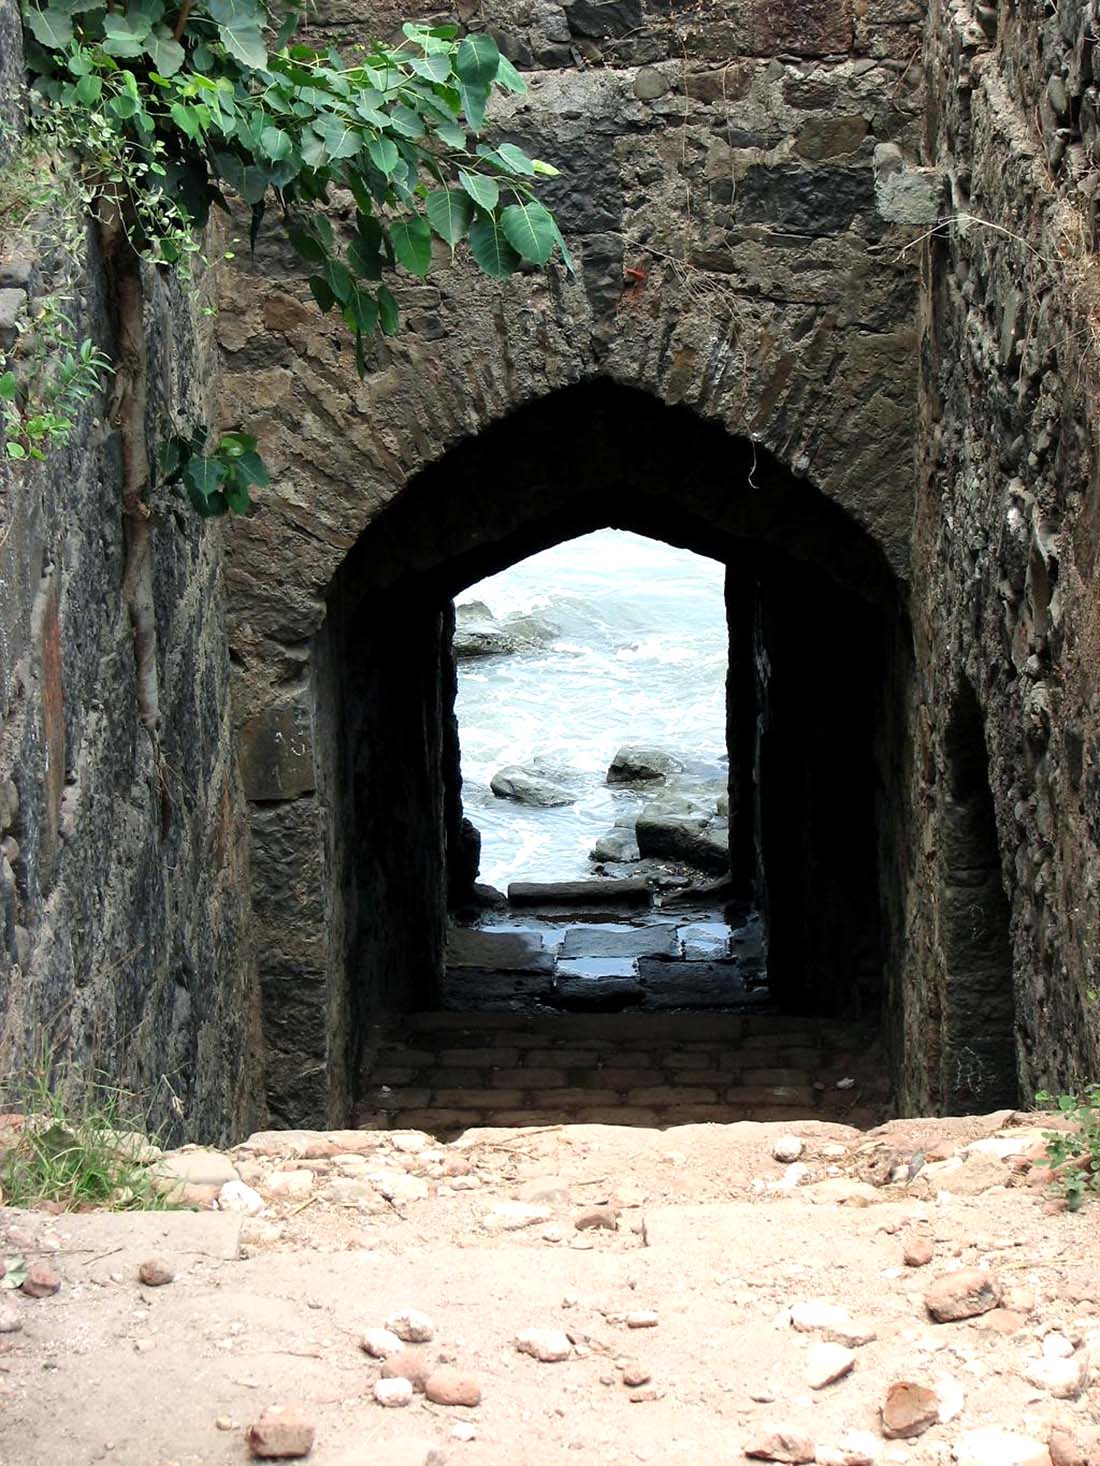 The hidden Chor Darwaaza opens itself to the endless sea. Image Source: Wikimedia Commons.